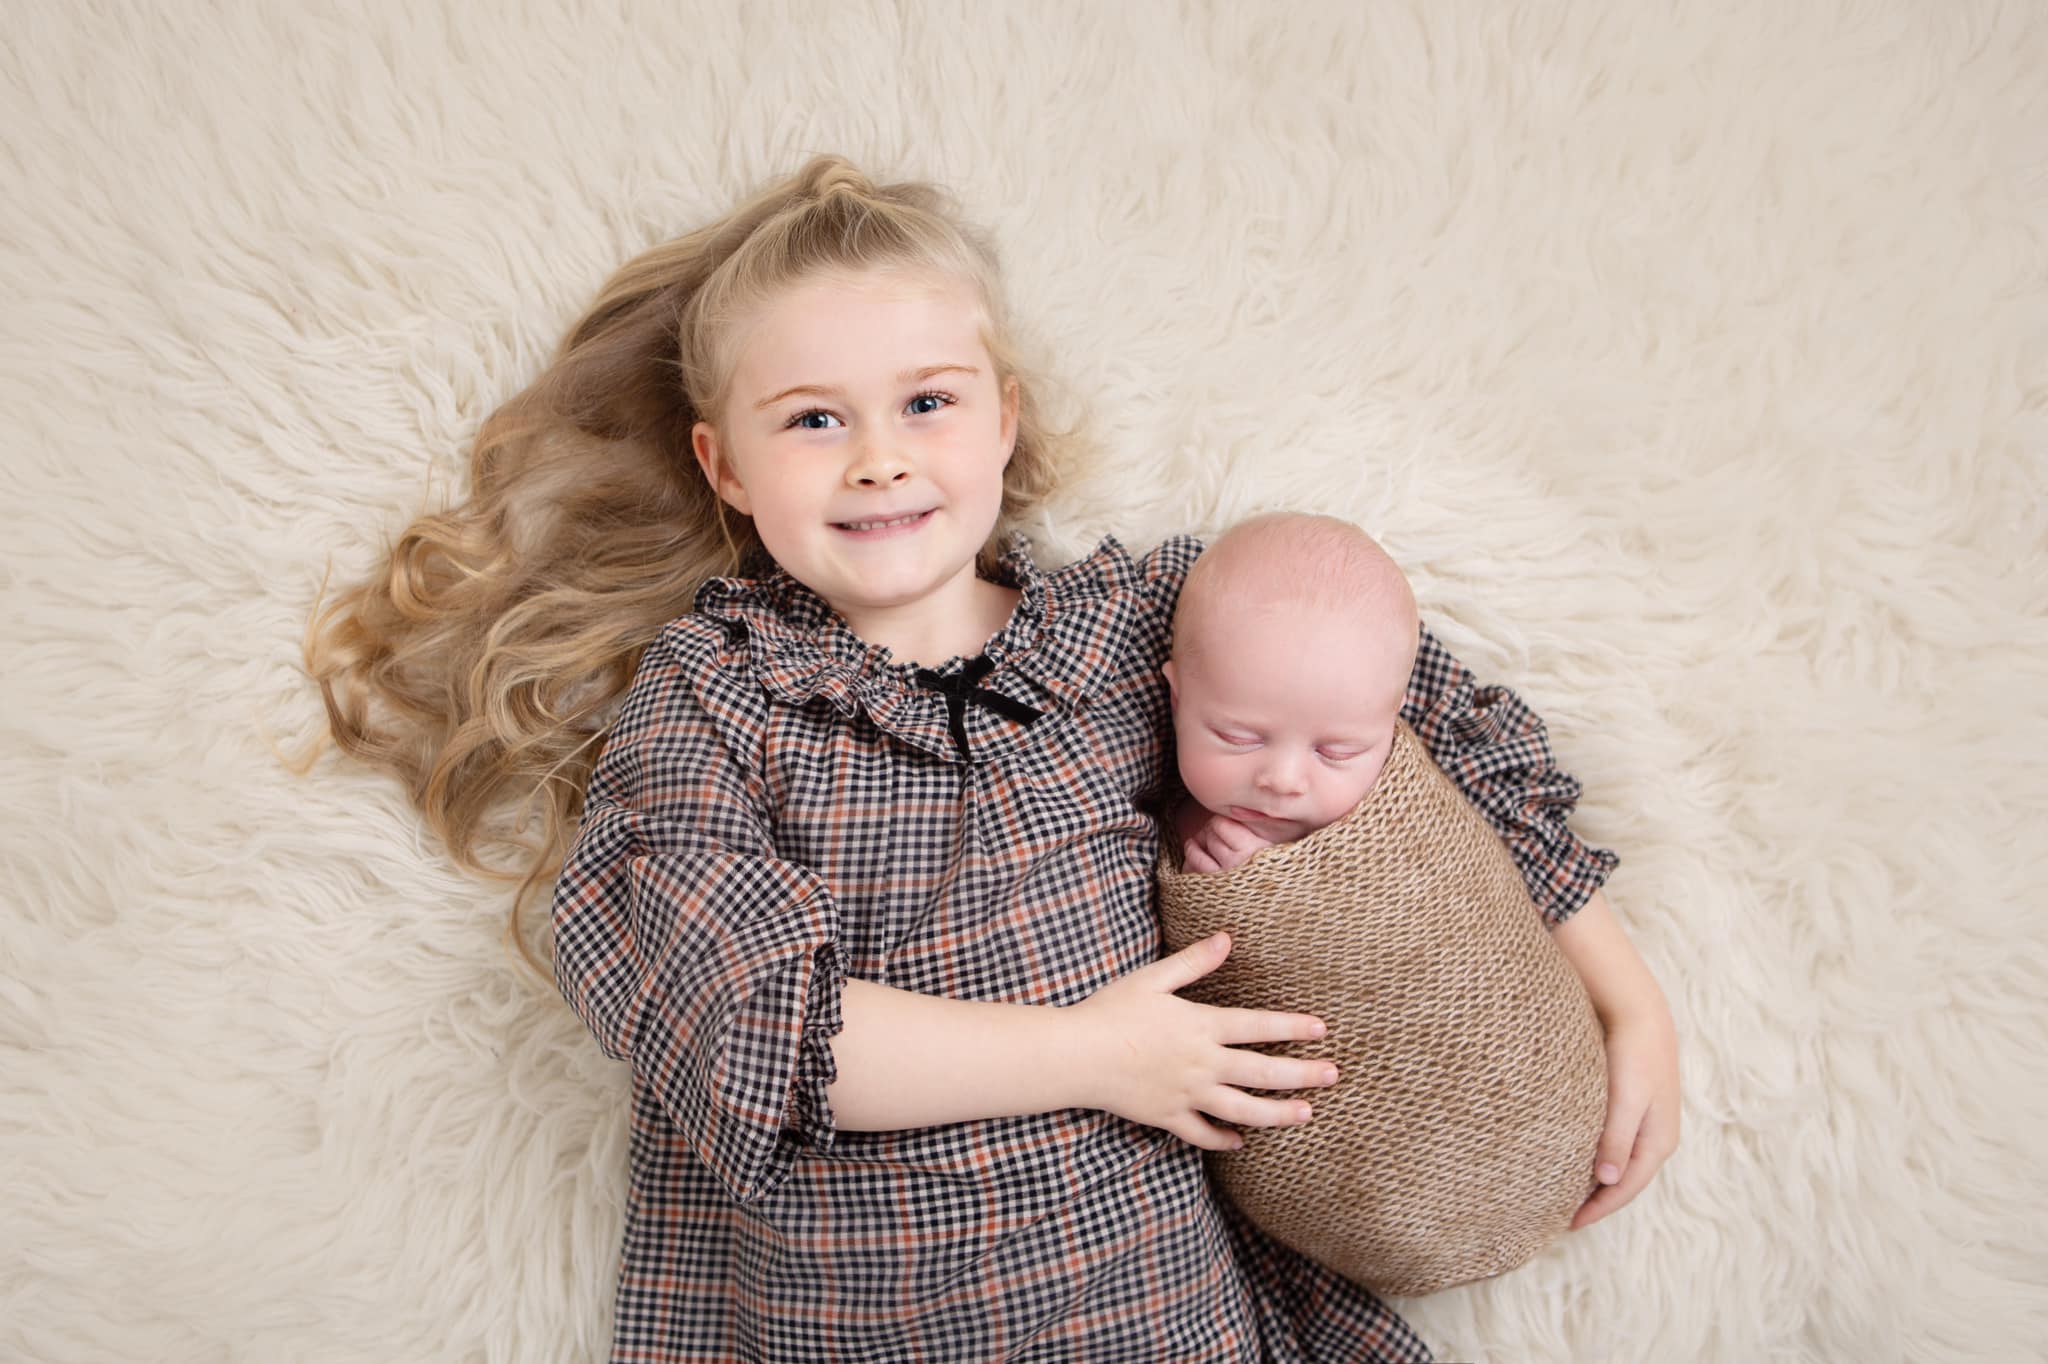 a beautiful girls with long blonde hair holding her baby brother